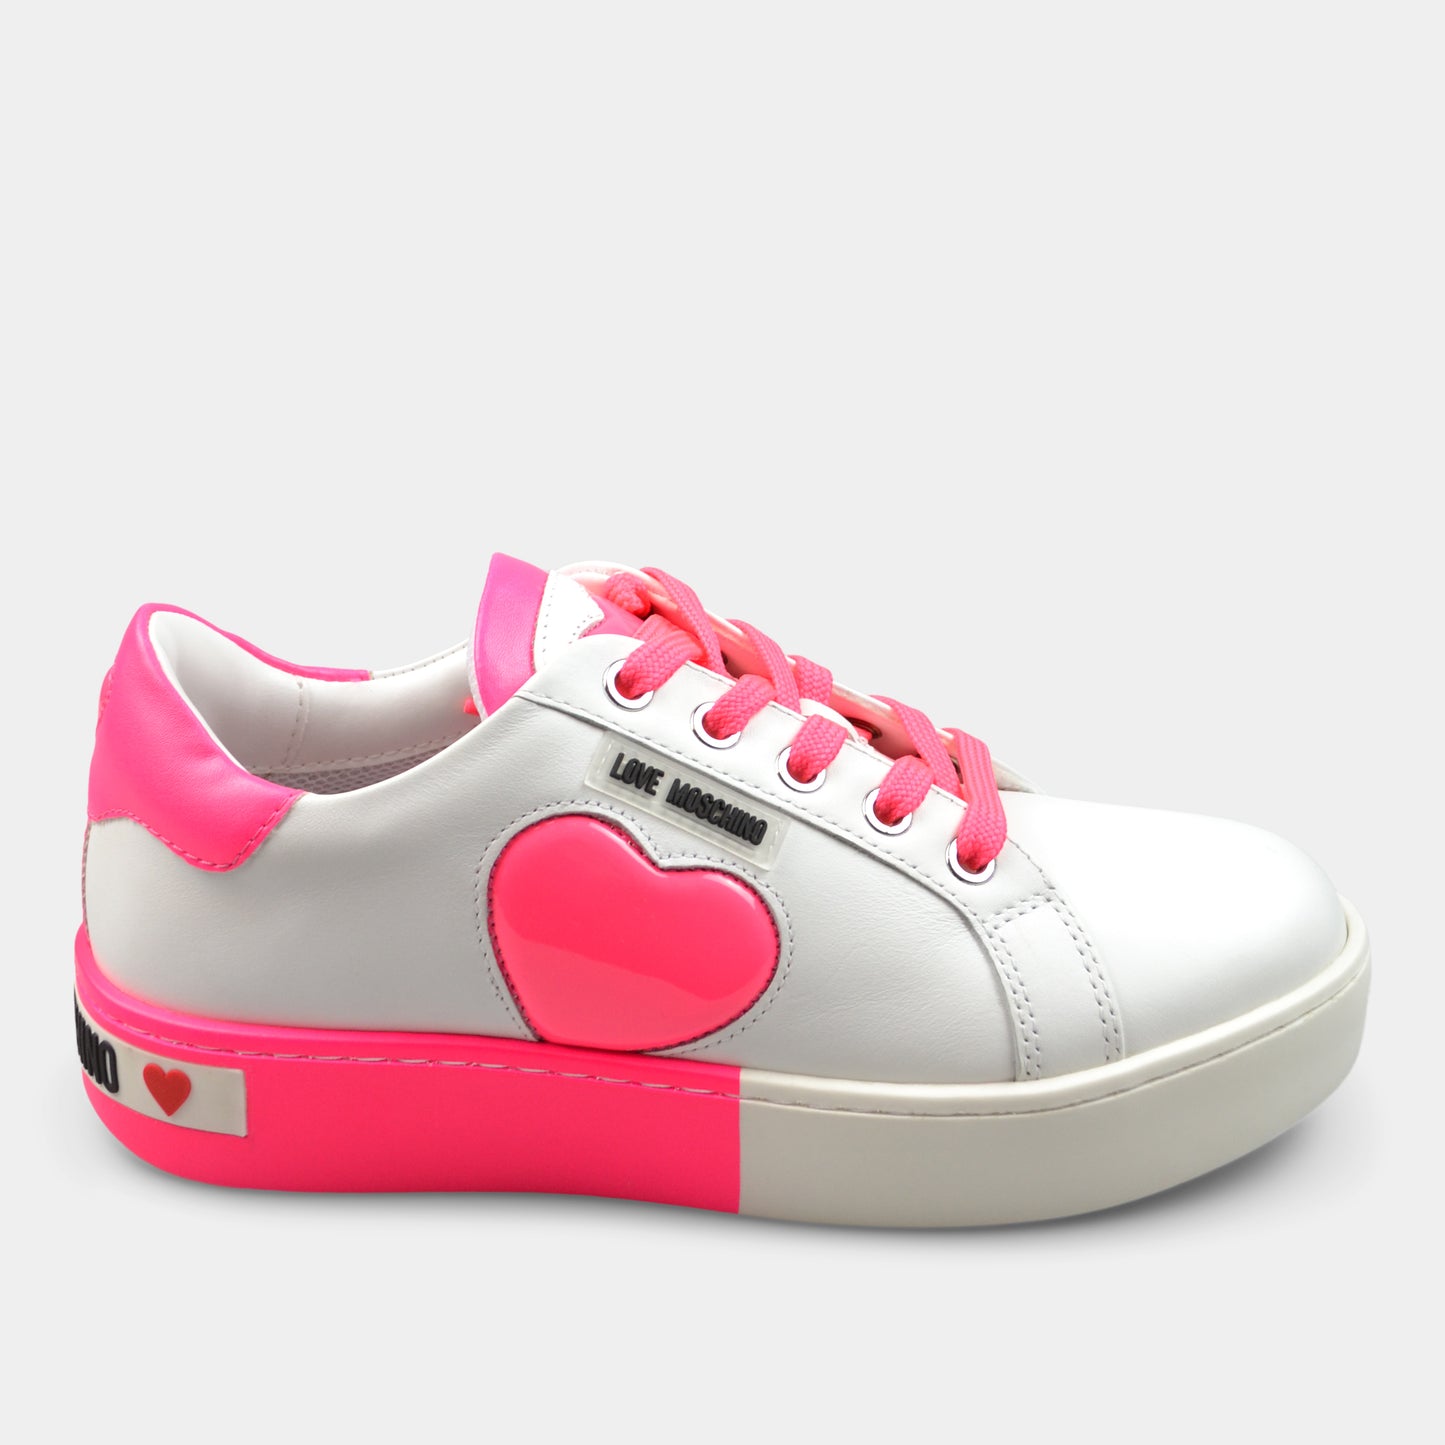 MOSCHINO LOVE SNEAKERS IN PINK